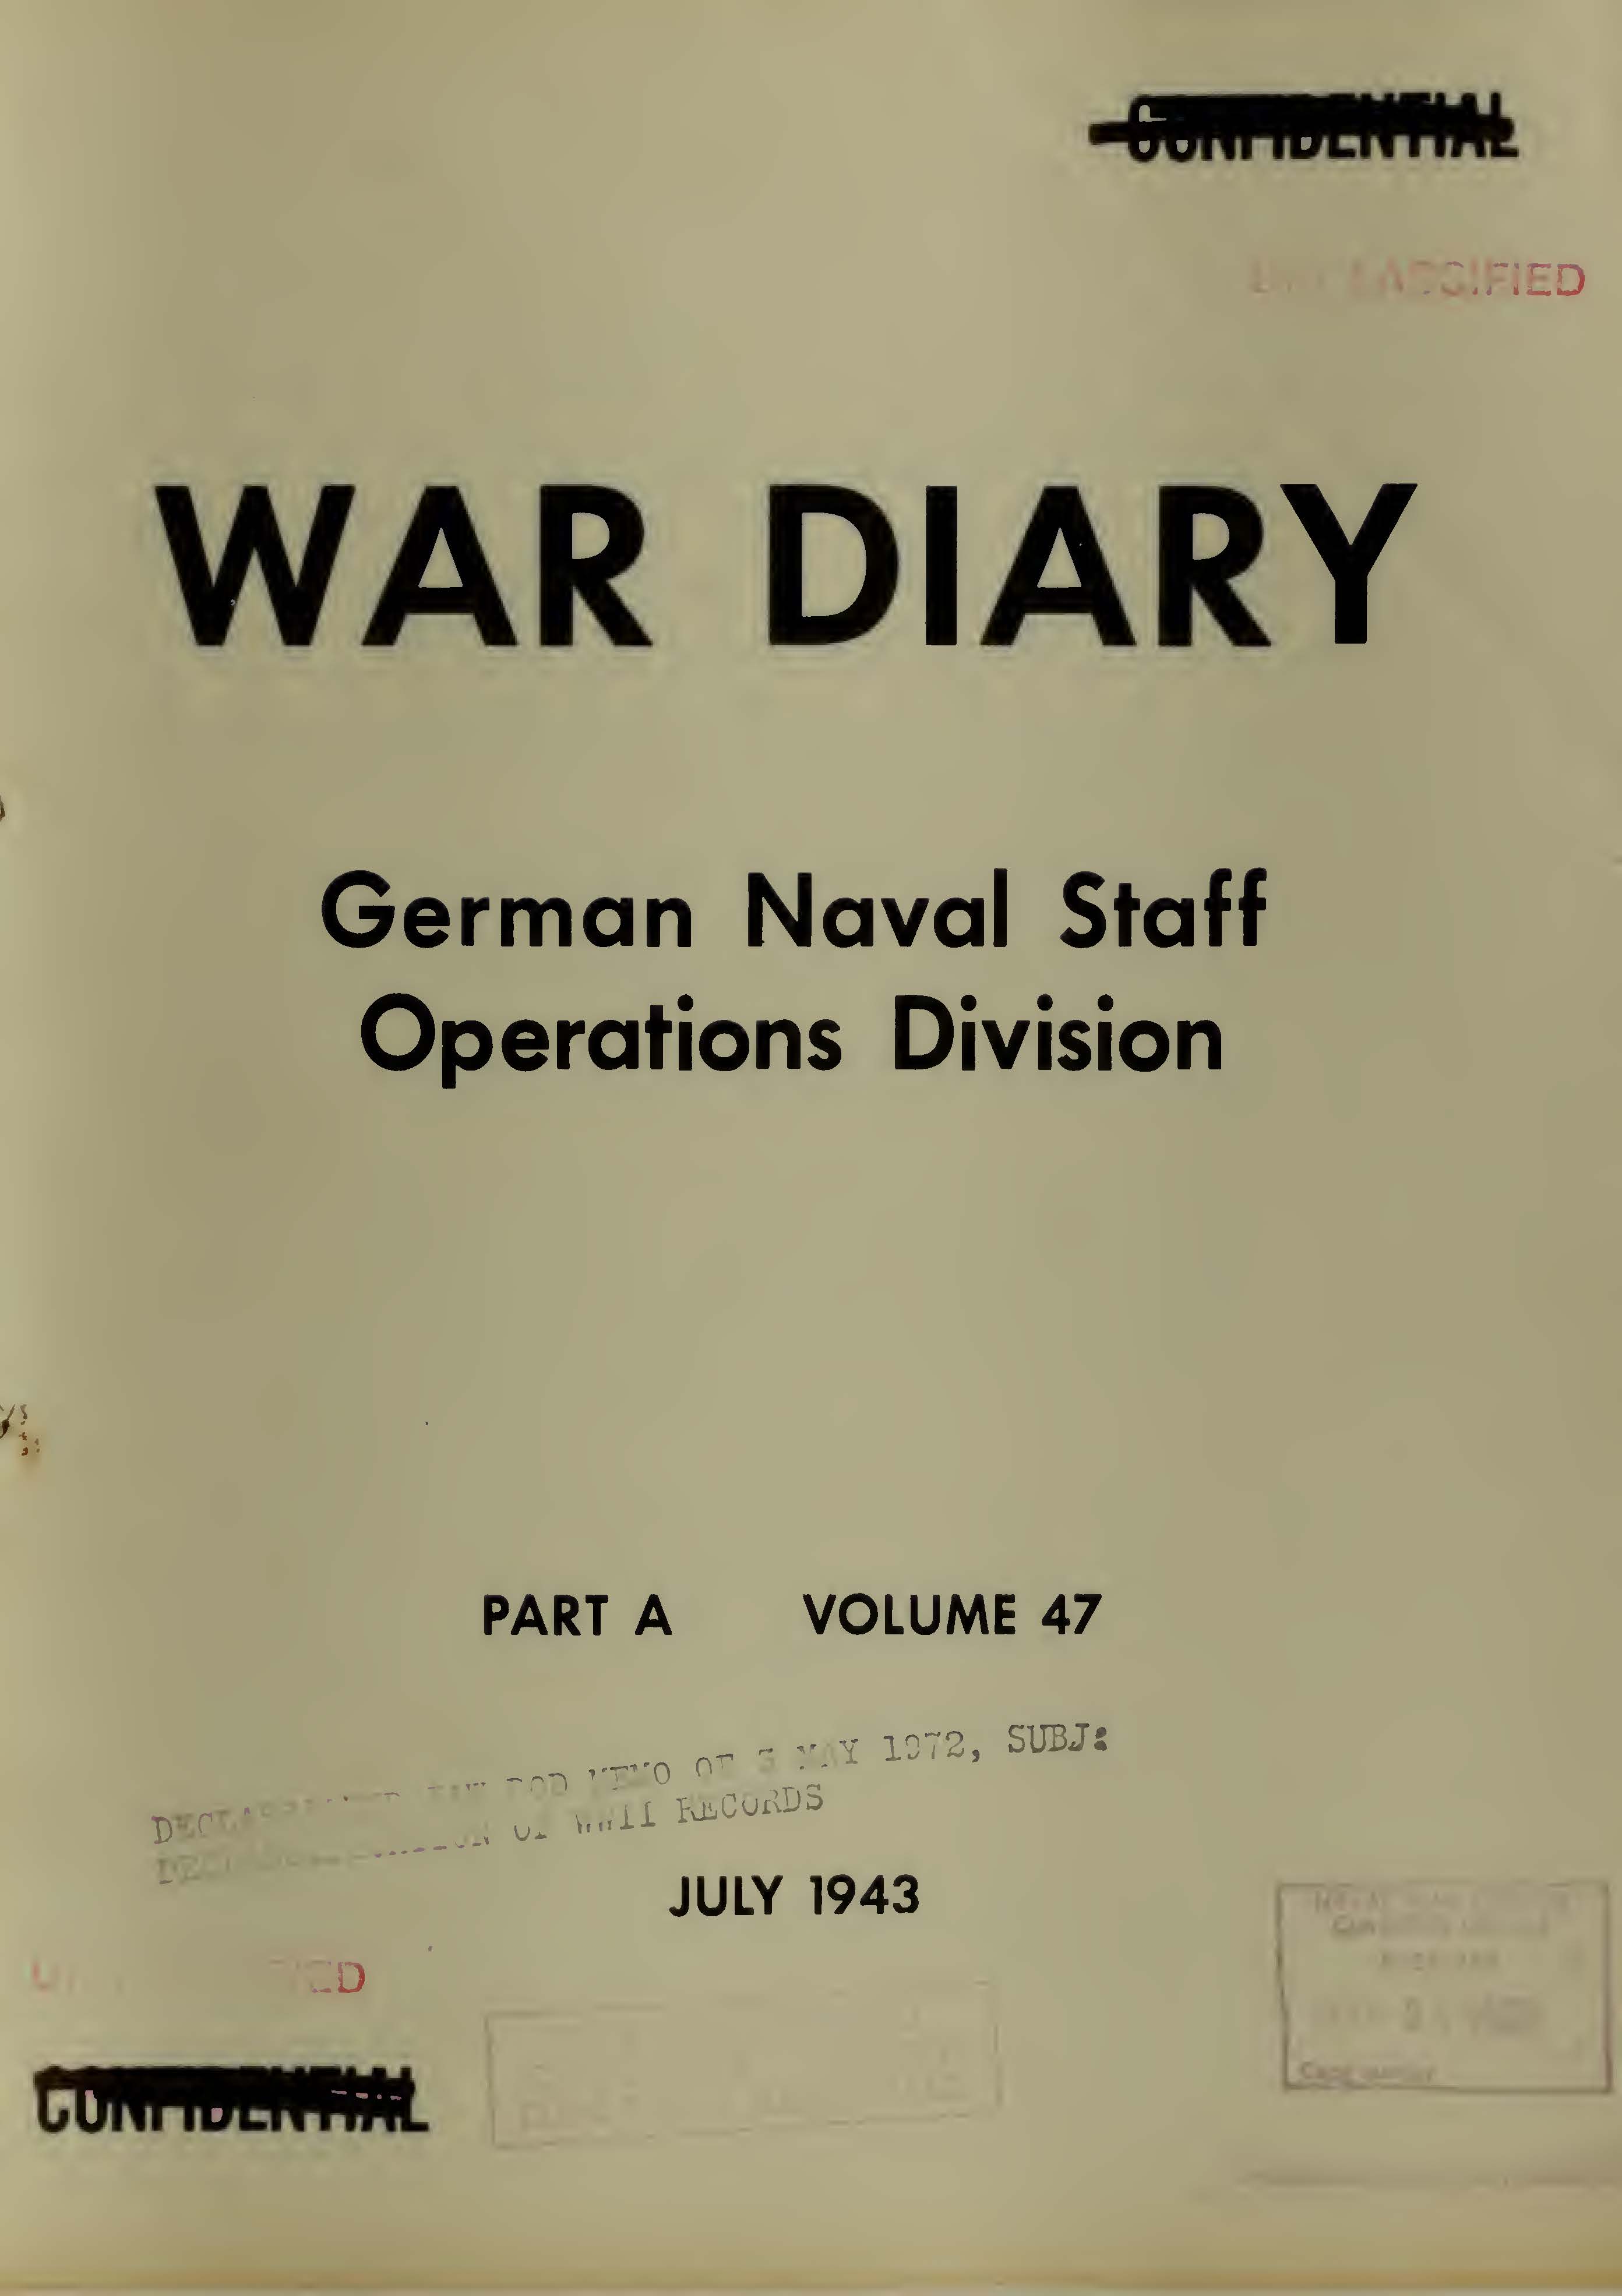 War Diary of German Naval Staff (Operations Division) Part A, Volume 47, July 1943